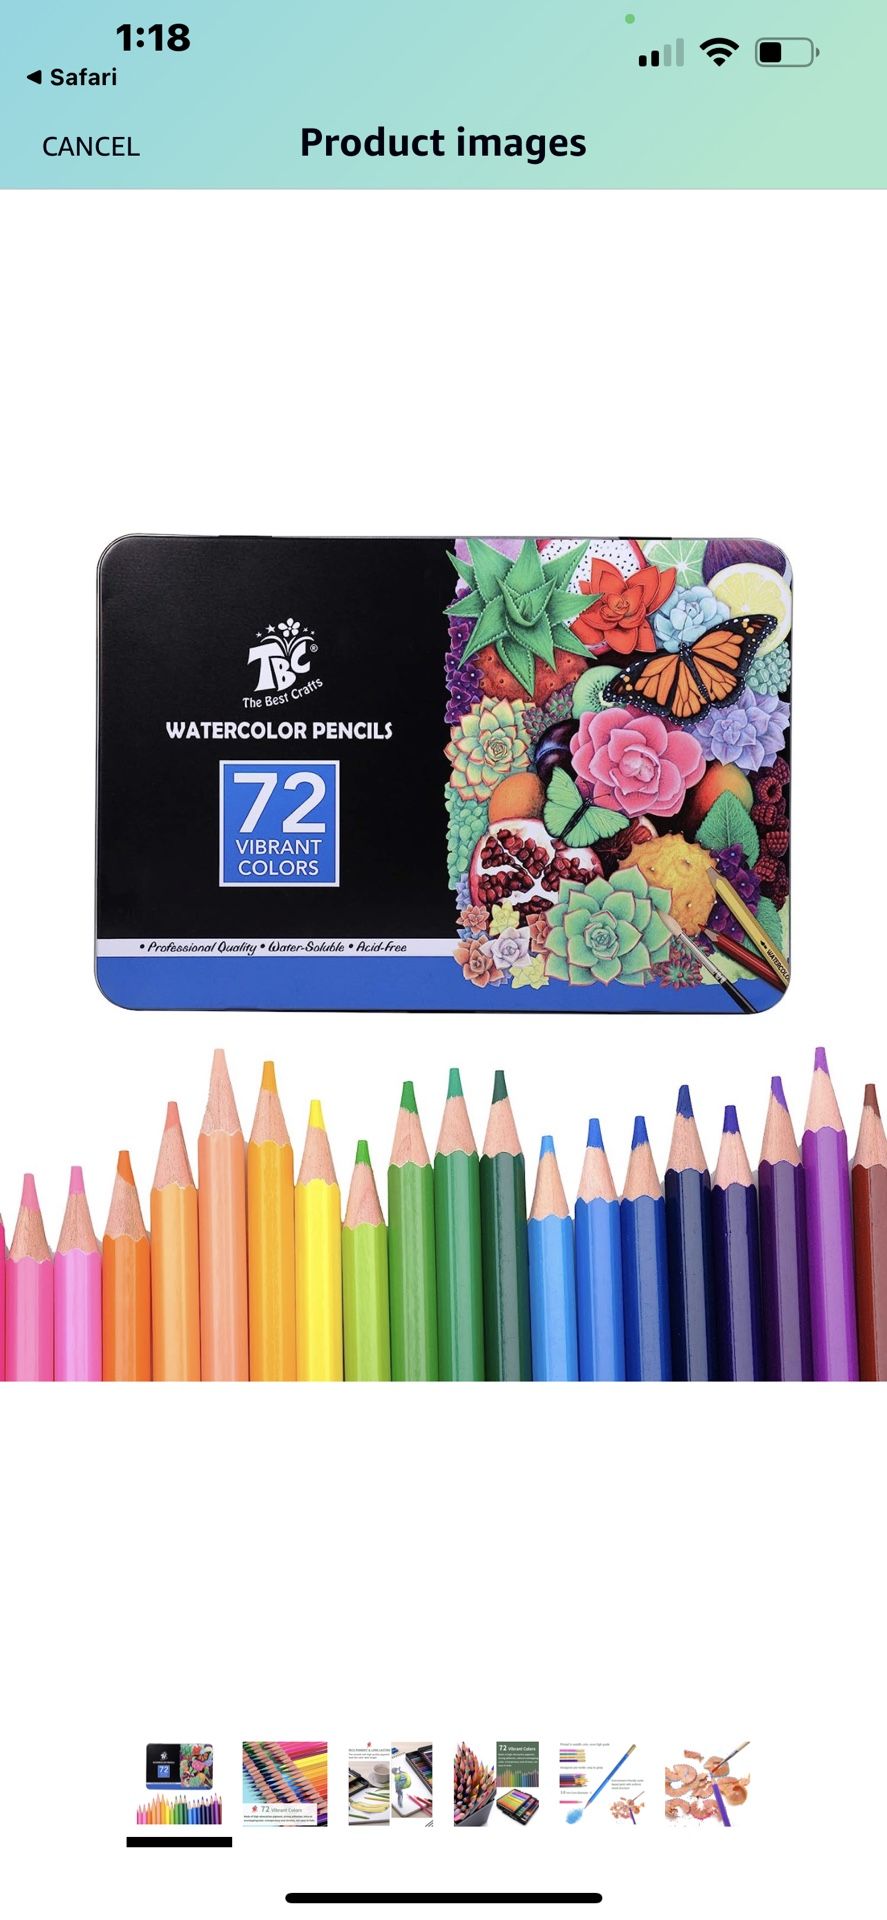 TBC The Best Crafts Watercolor Pencils,72 Professional Color Pencil Set for Adult and Kids, Art Drawing Pencils for Coloring,Painting. $15